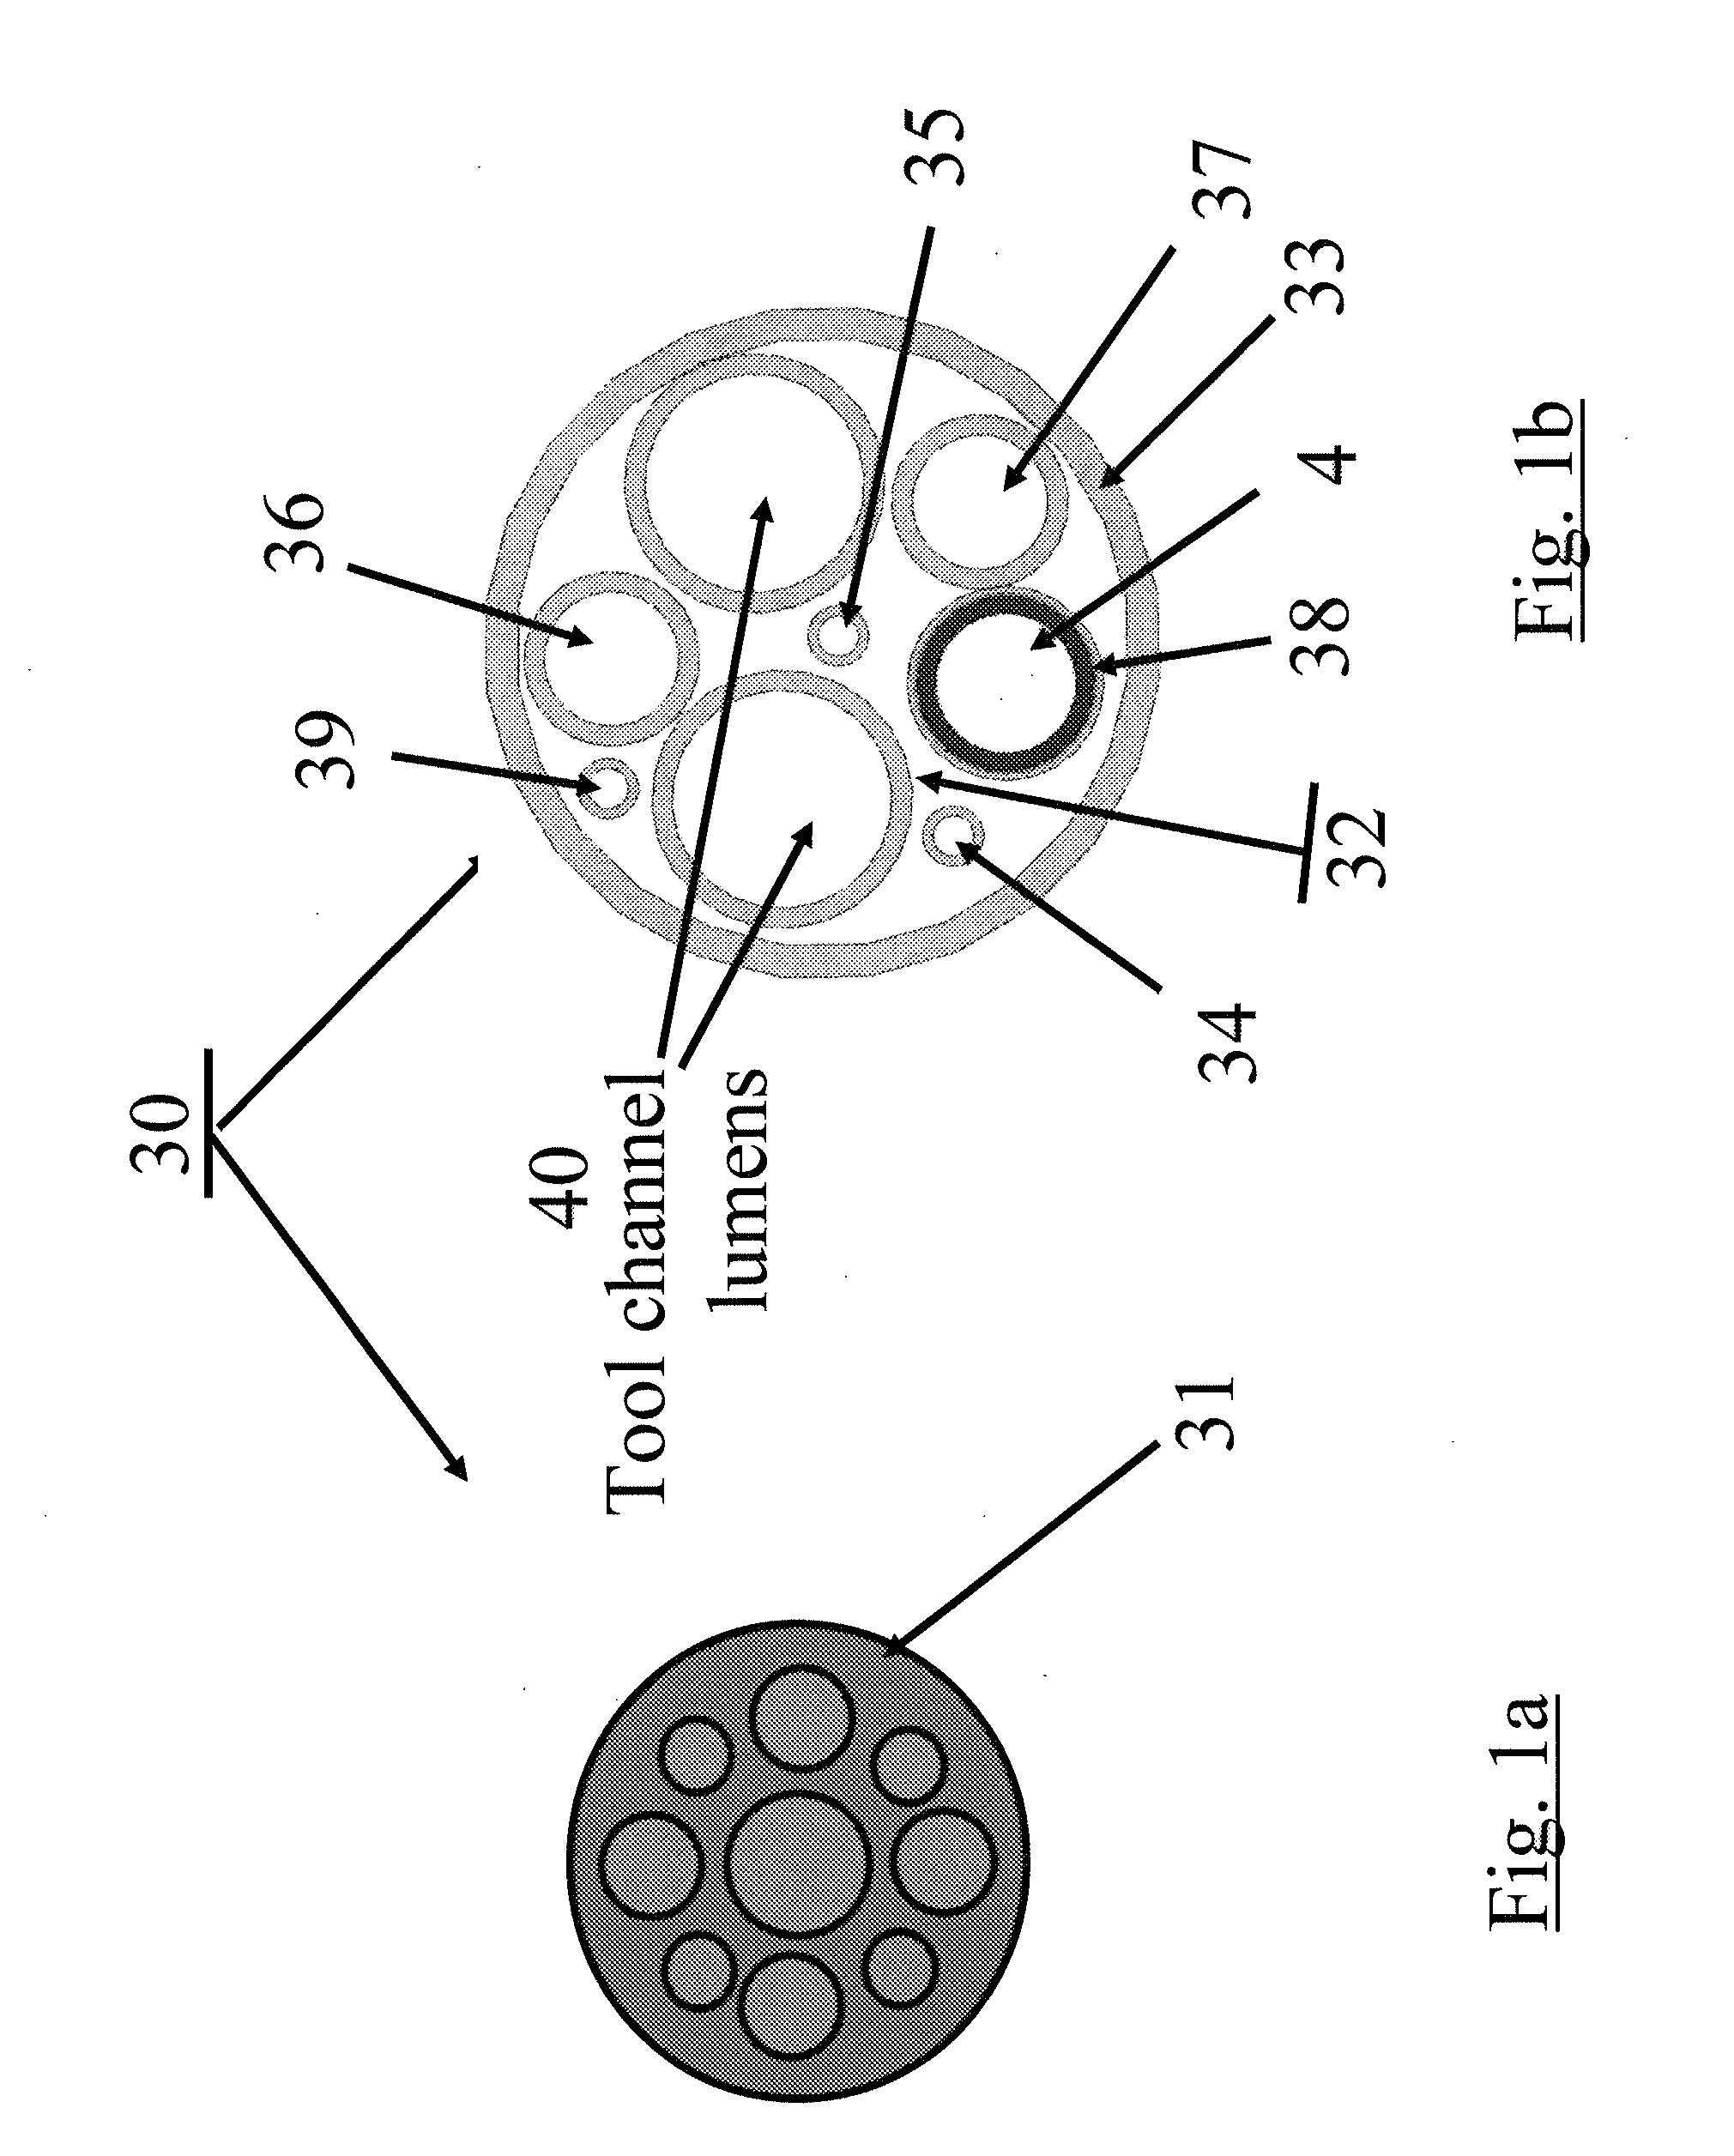 Arrangements and methods for effecting an endoluminal anatomical structure